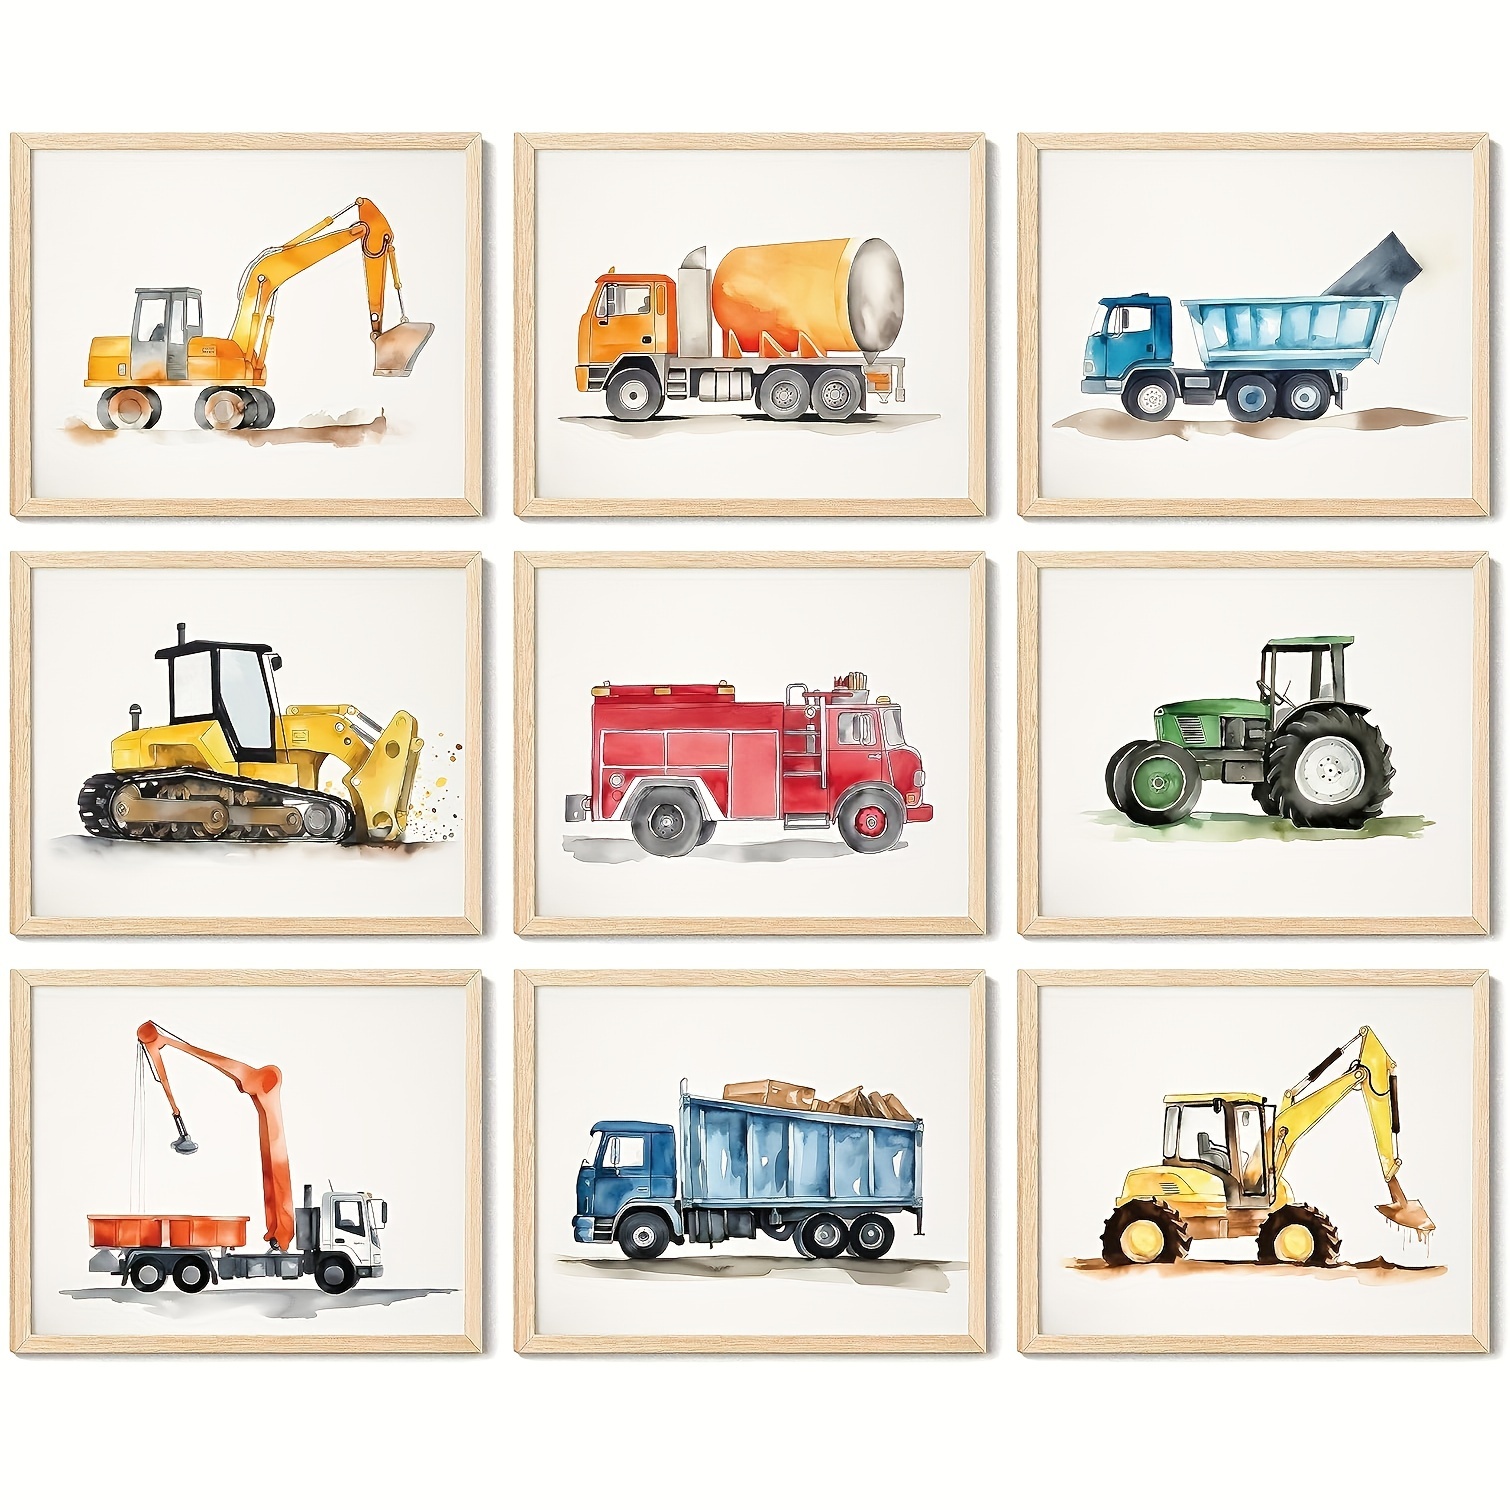 

9 Pc Unframe Construction Room Decor - Construction Bedroom Decor, Dump Truck Wall Art Prints, Tractor Nursery Pictures, Transportation Vehicle Decoration Toddler Playroom 8 X 10 Inch/ 20 X 25 Cm